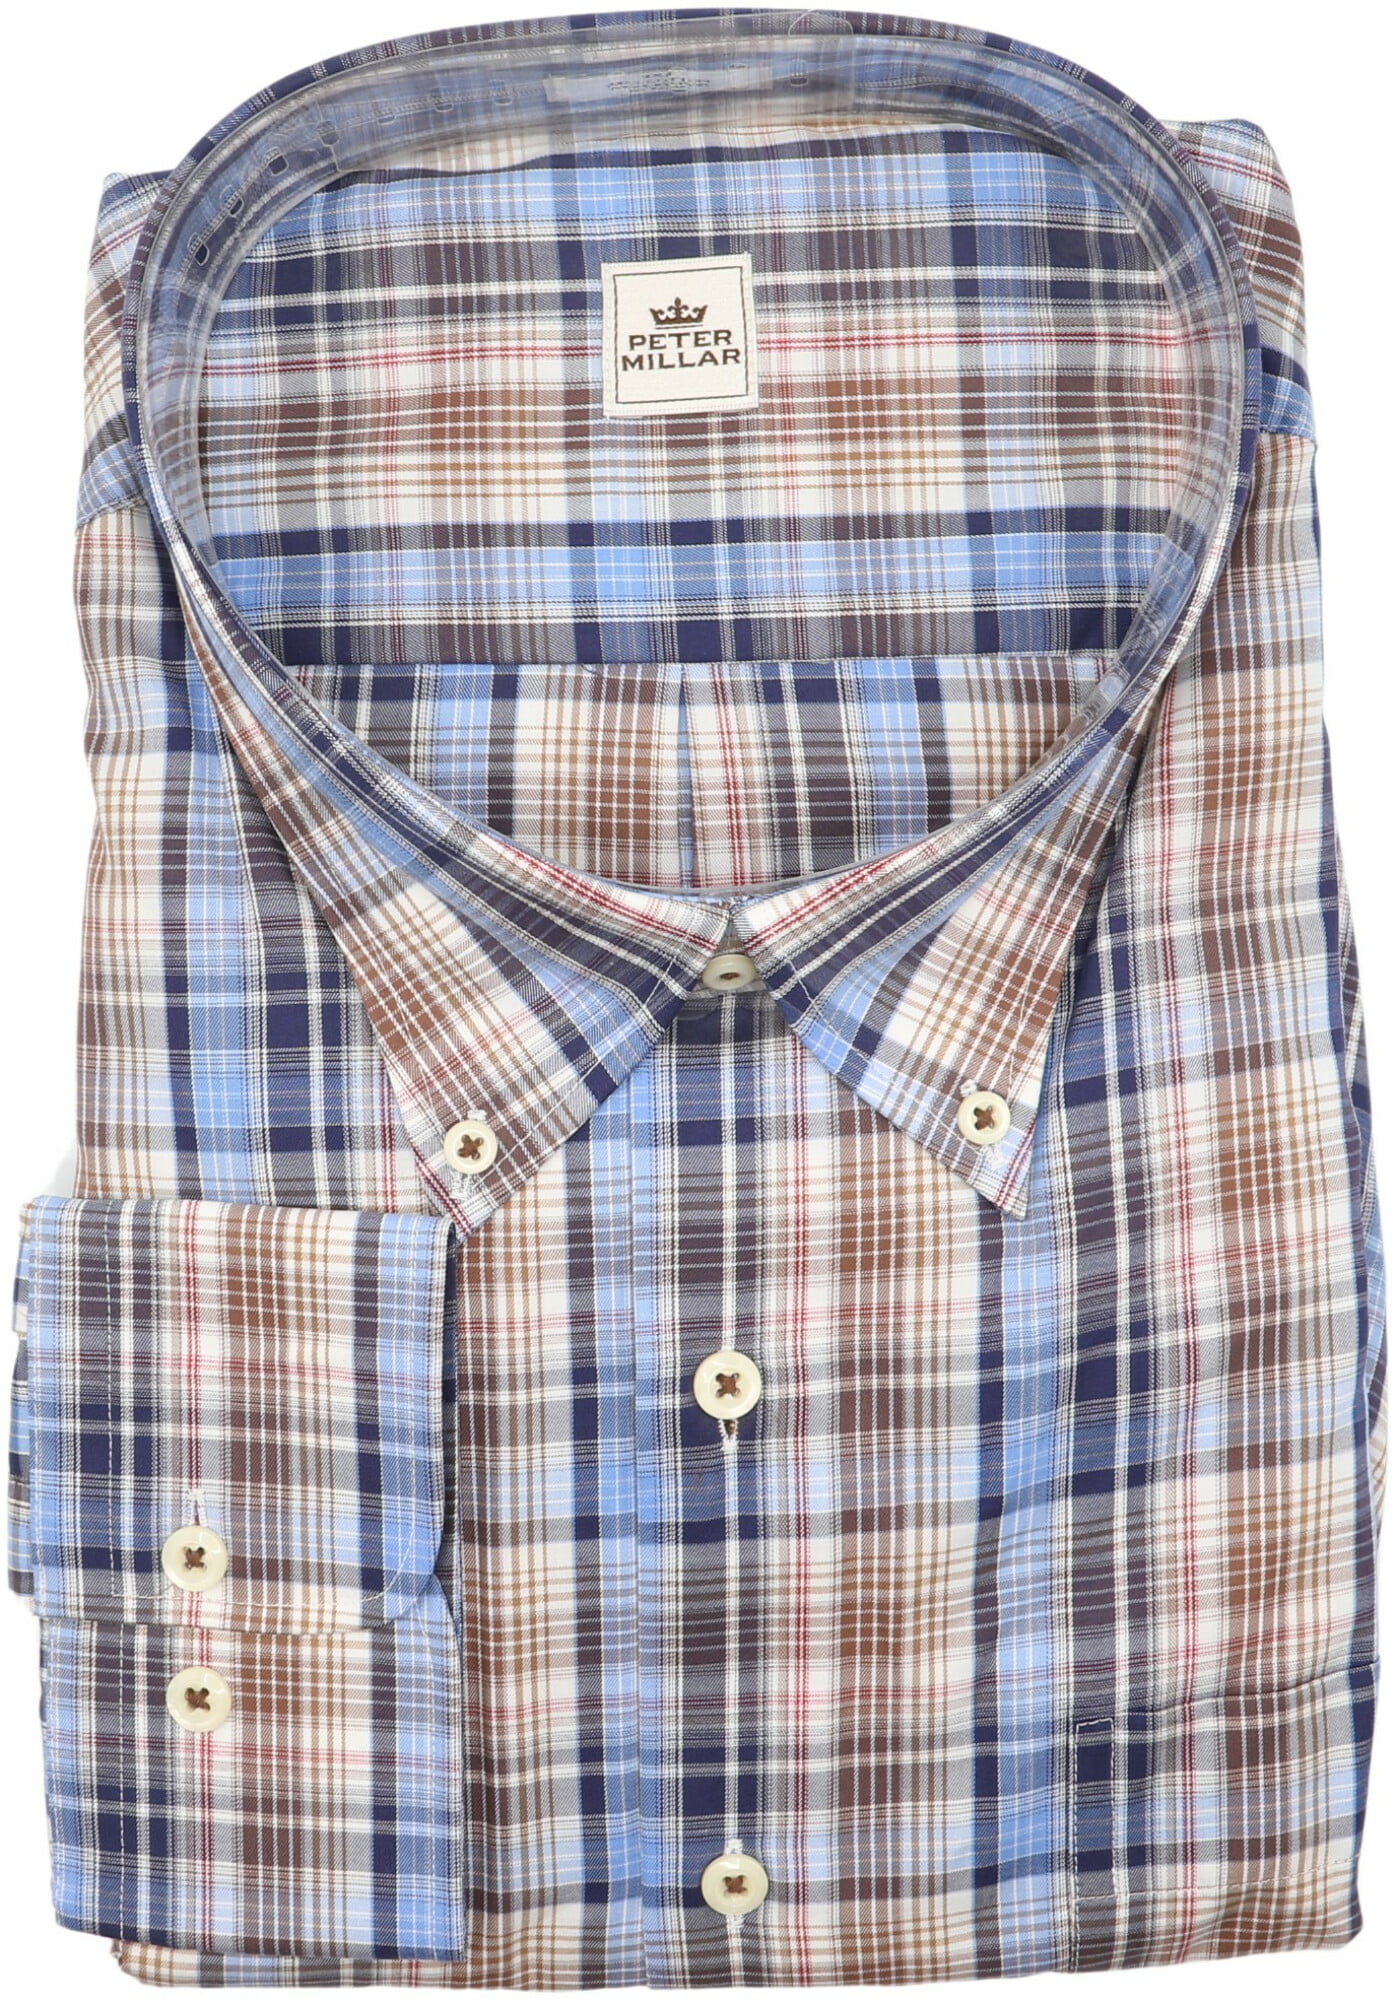 peter millar shirts & tops for Sale,Up To OFF 77%